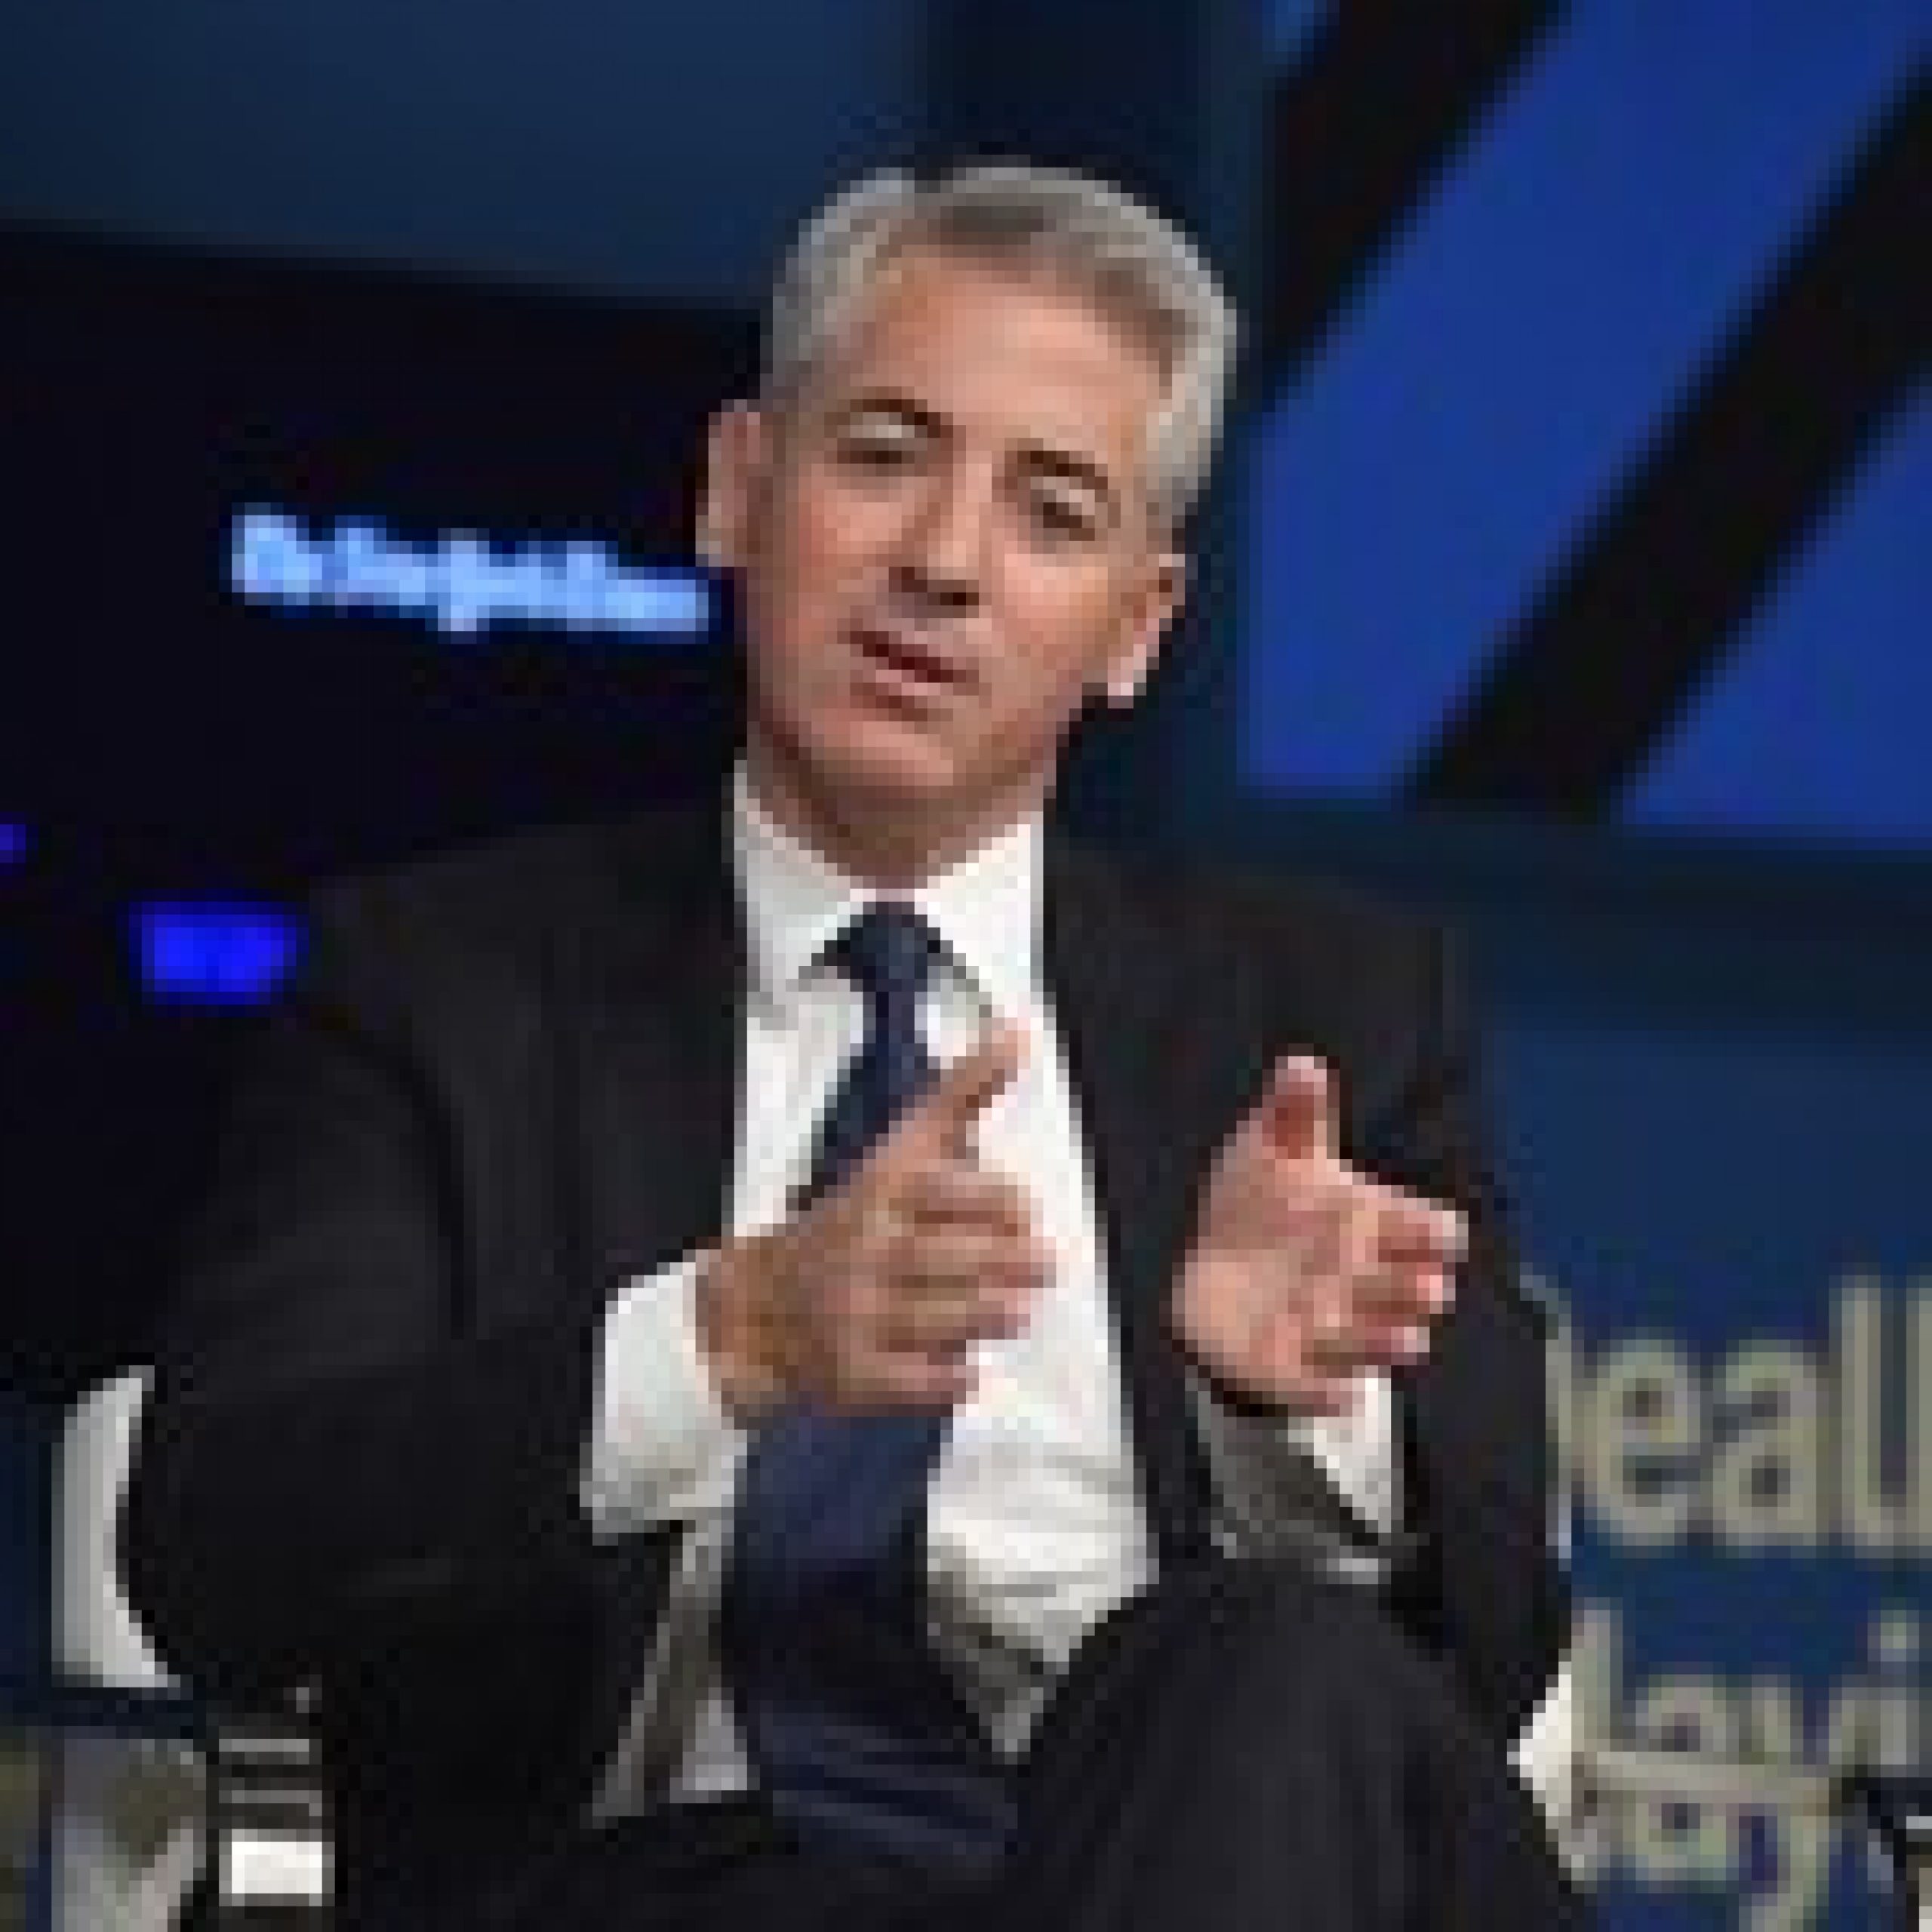 Bill Ackman’s UMG Play: A Bad Deal or Just Too Confusing for Investors?